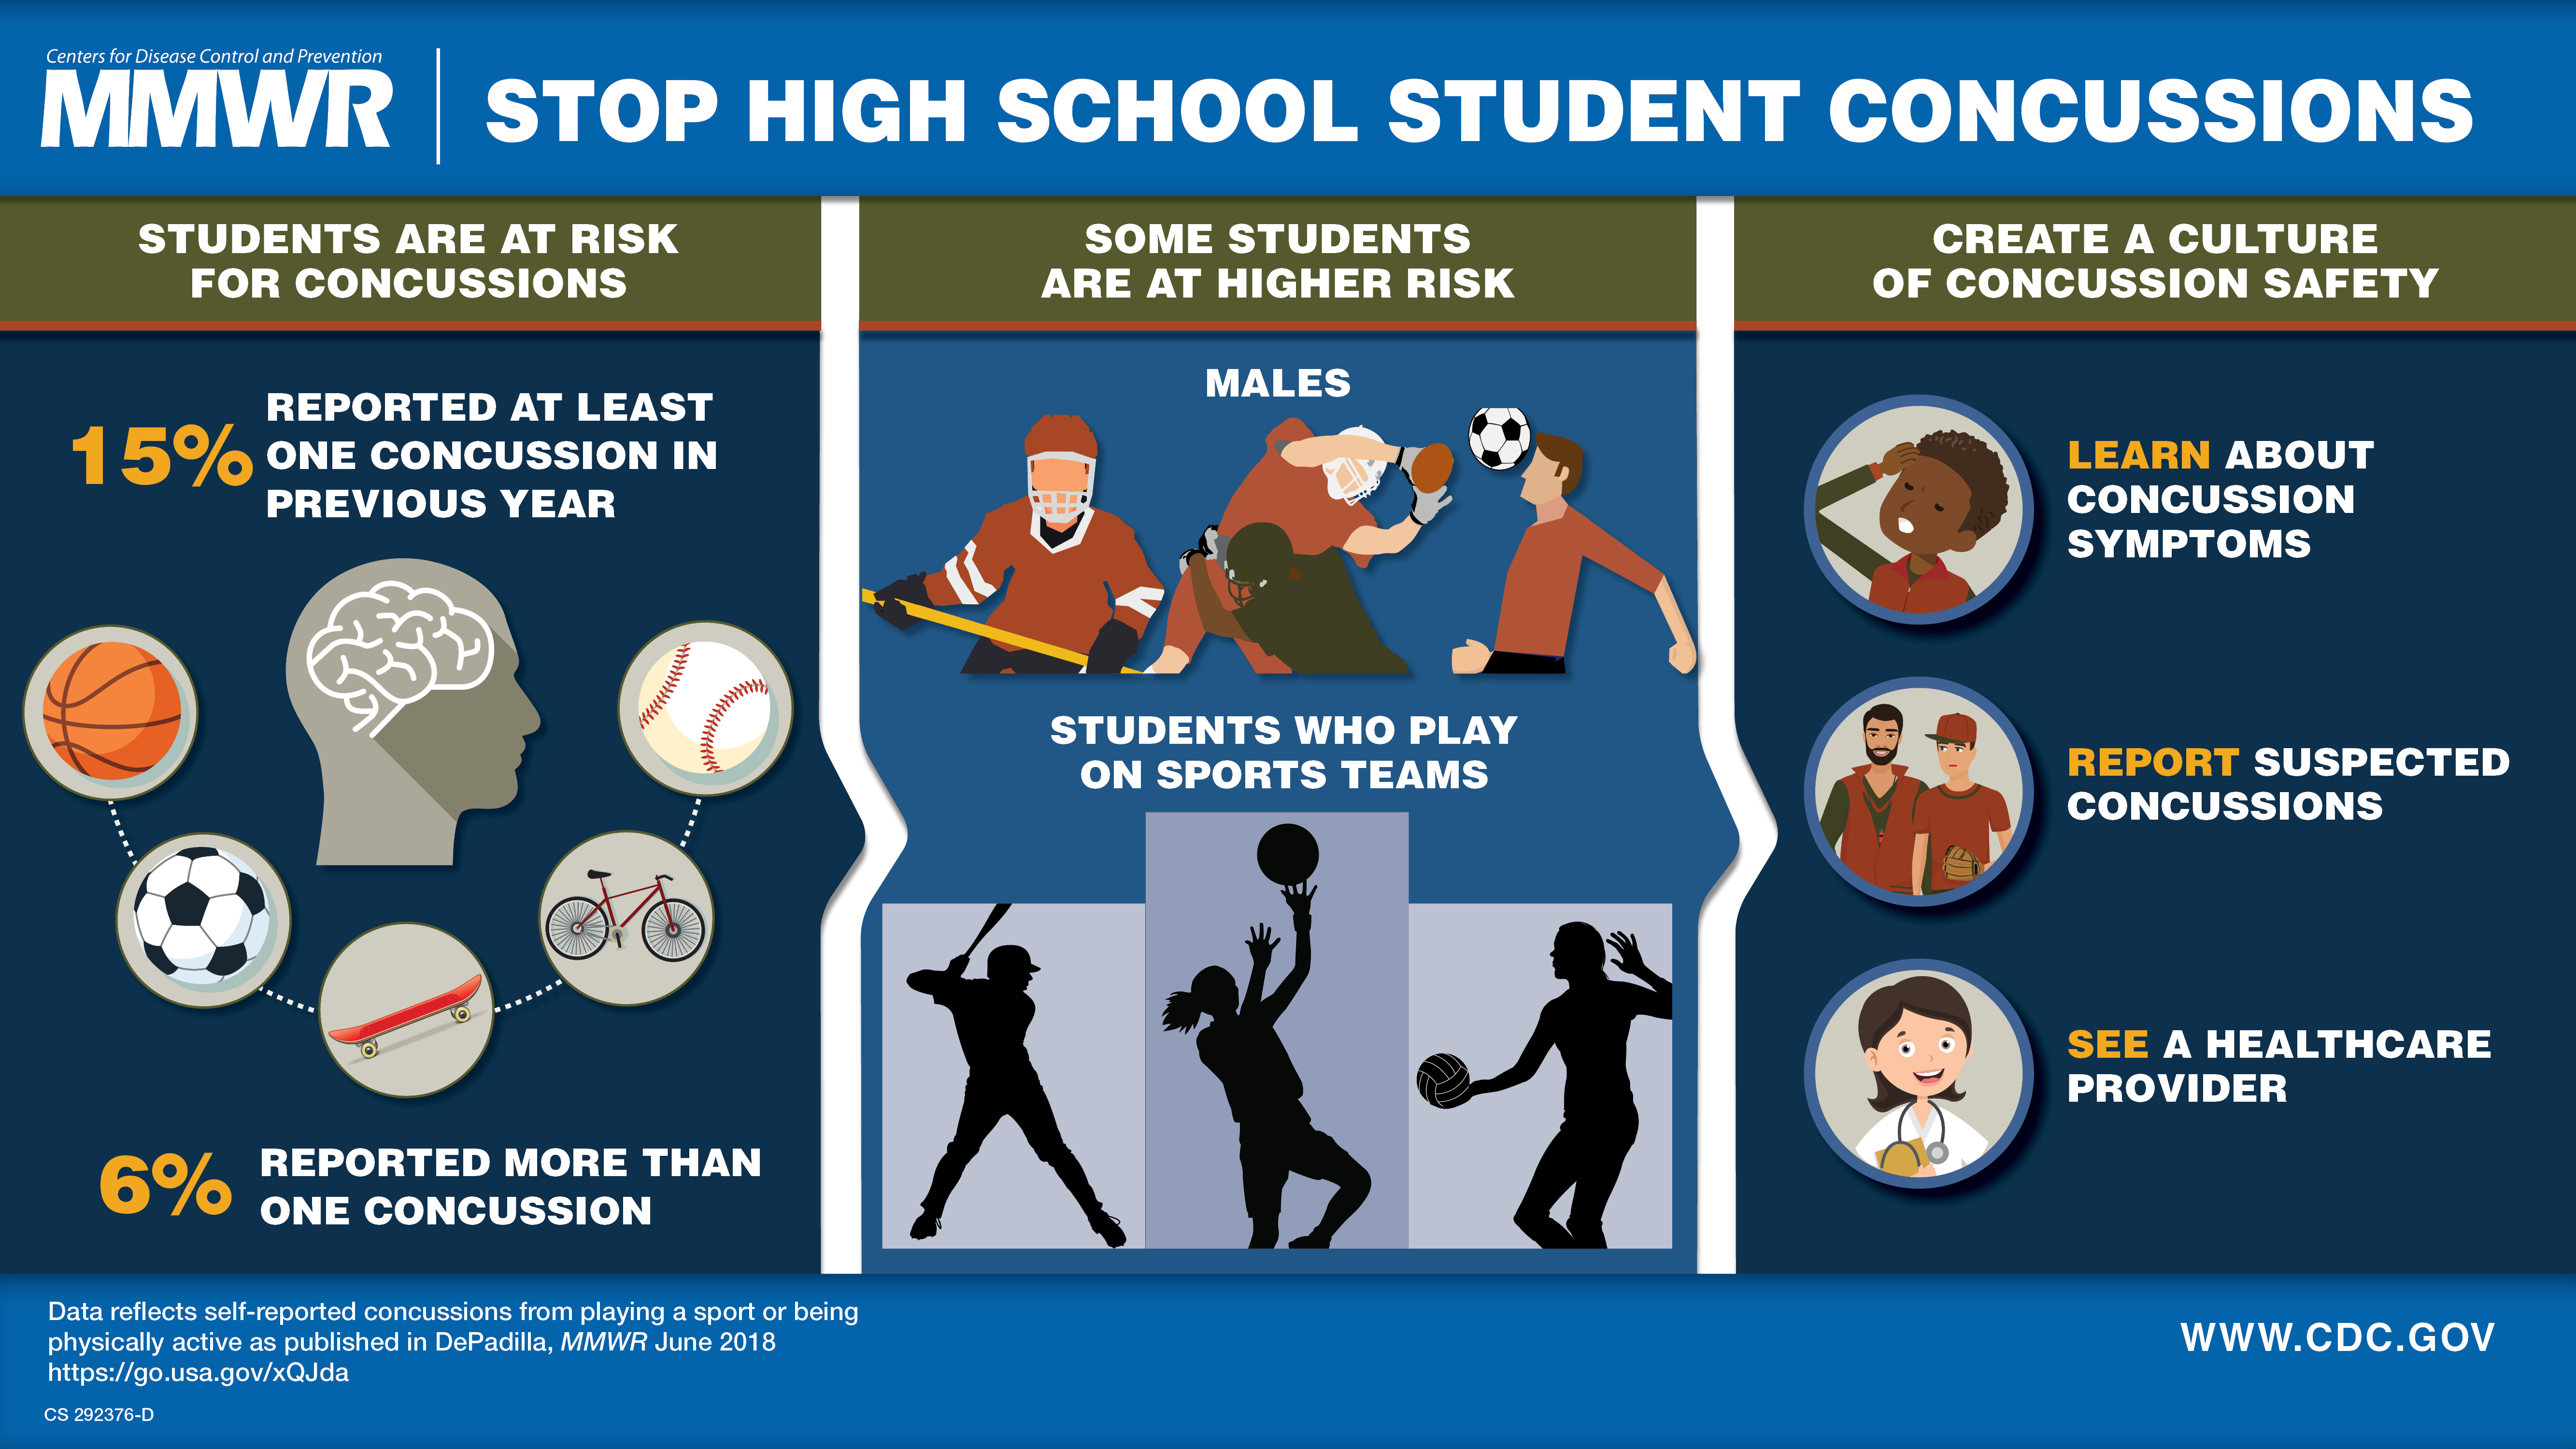 The figure above is a visual abstract displaying the findings of the report which suggest that students who play on team sports are at a higher risk for concussion than students who do not play on a sports team.